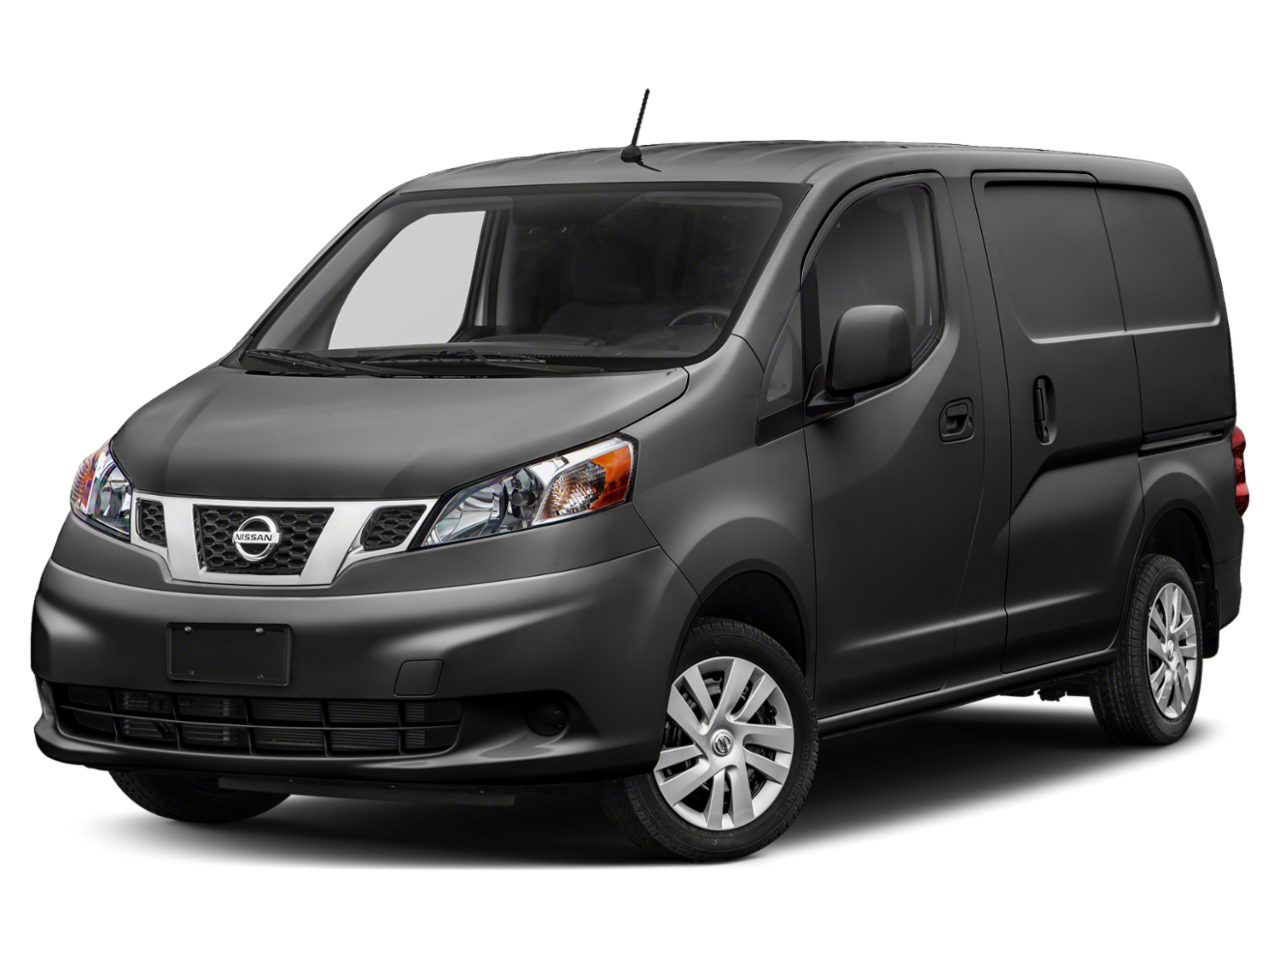 2021 Nissan NV200 Compact Cargo lease $949 Mo $0 Down Leases Available